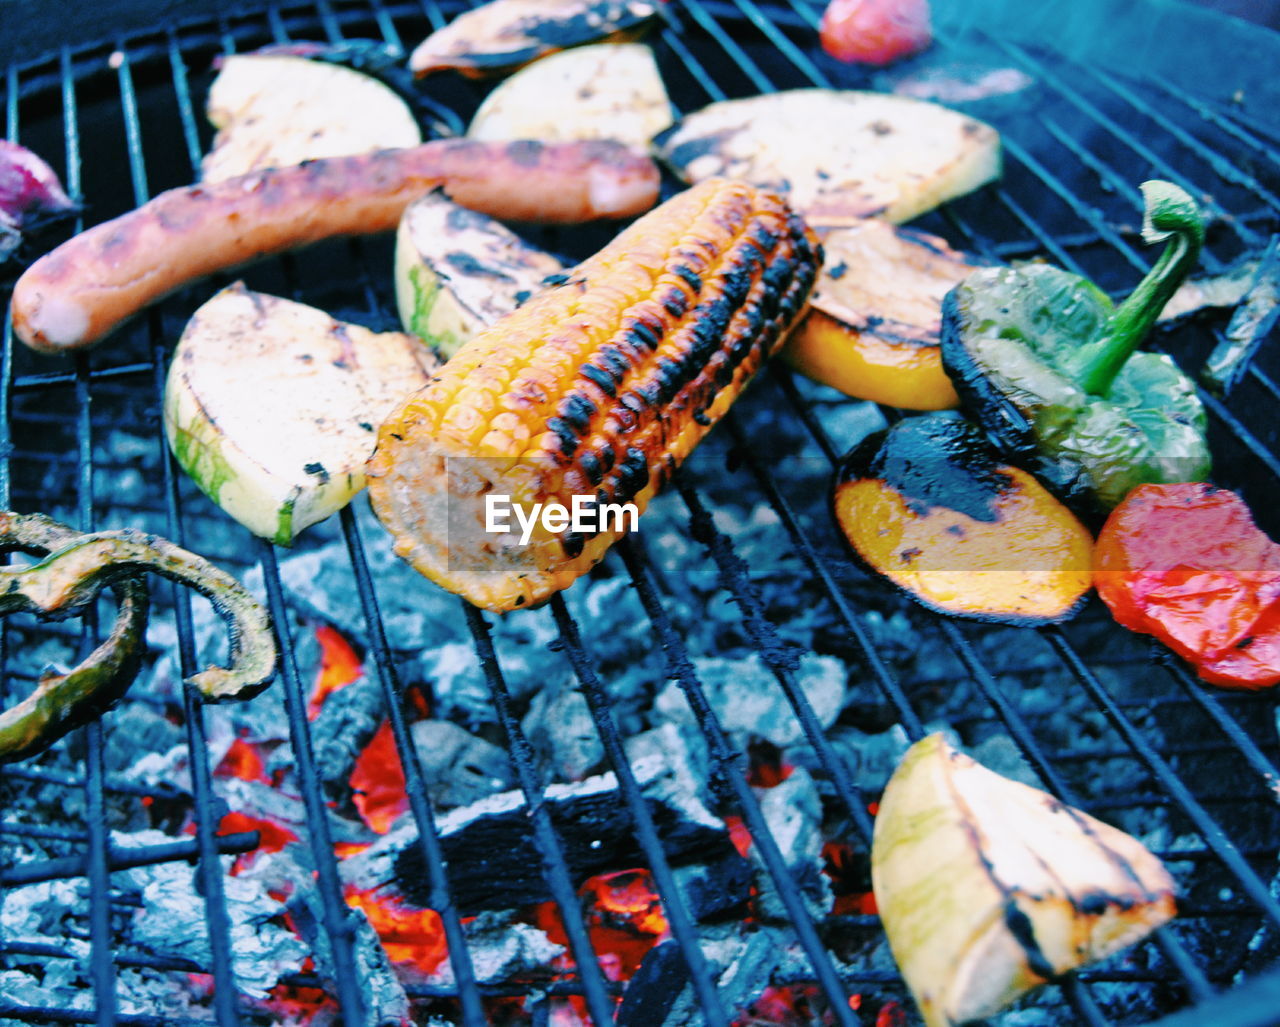 High angle view of various vegetables grilling on barbeque